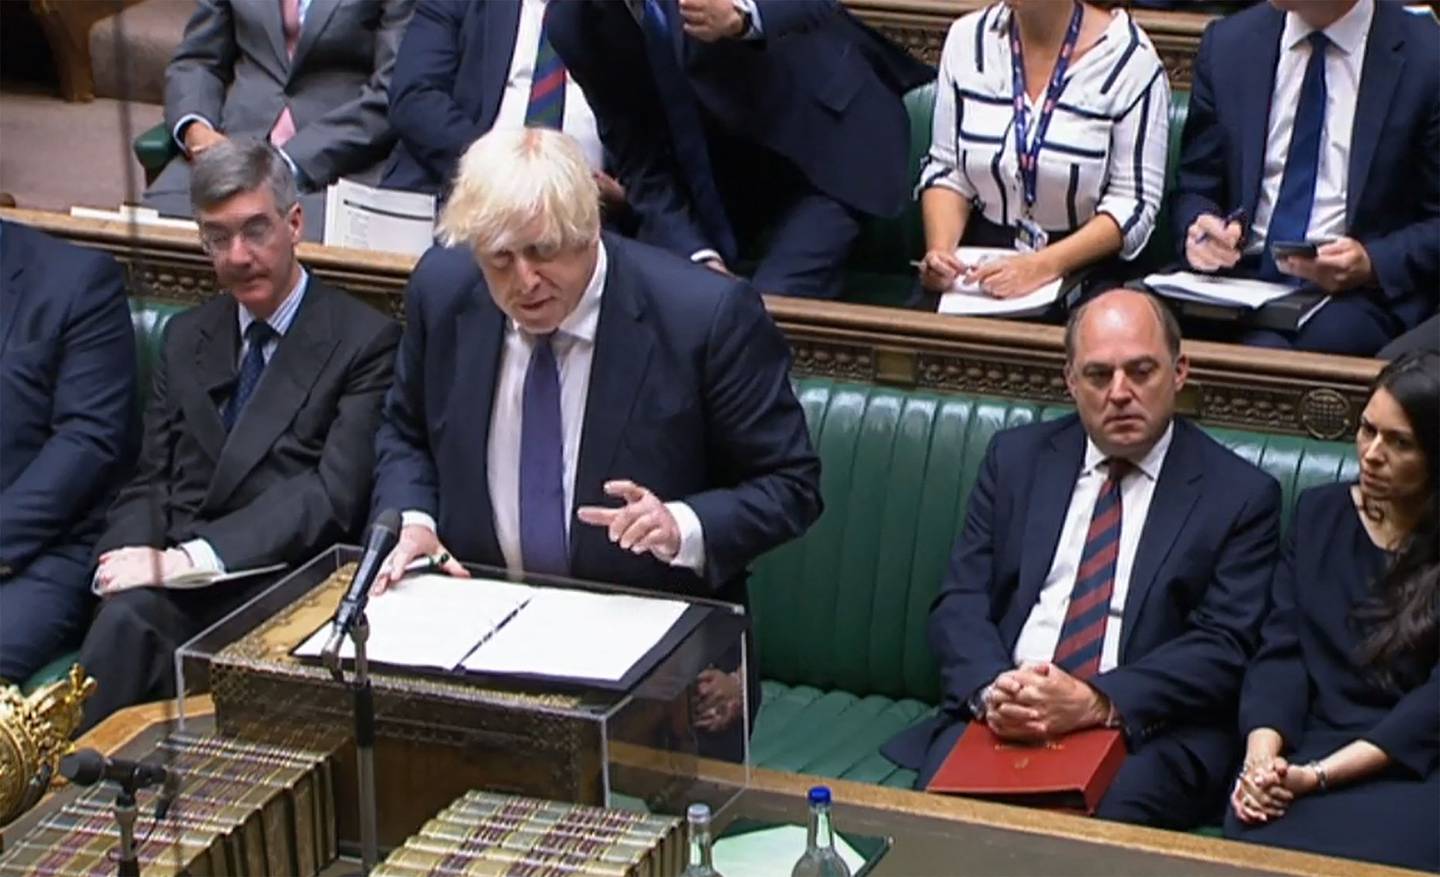 UK Prime Minister Boris Johnson addresses parliament during an extraordinary session to discuss the collapse of the Afghan government. AFP